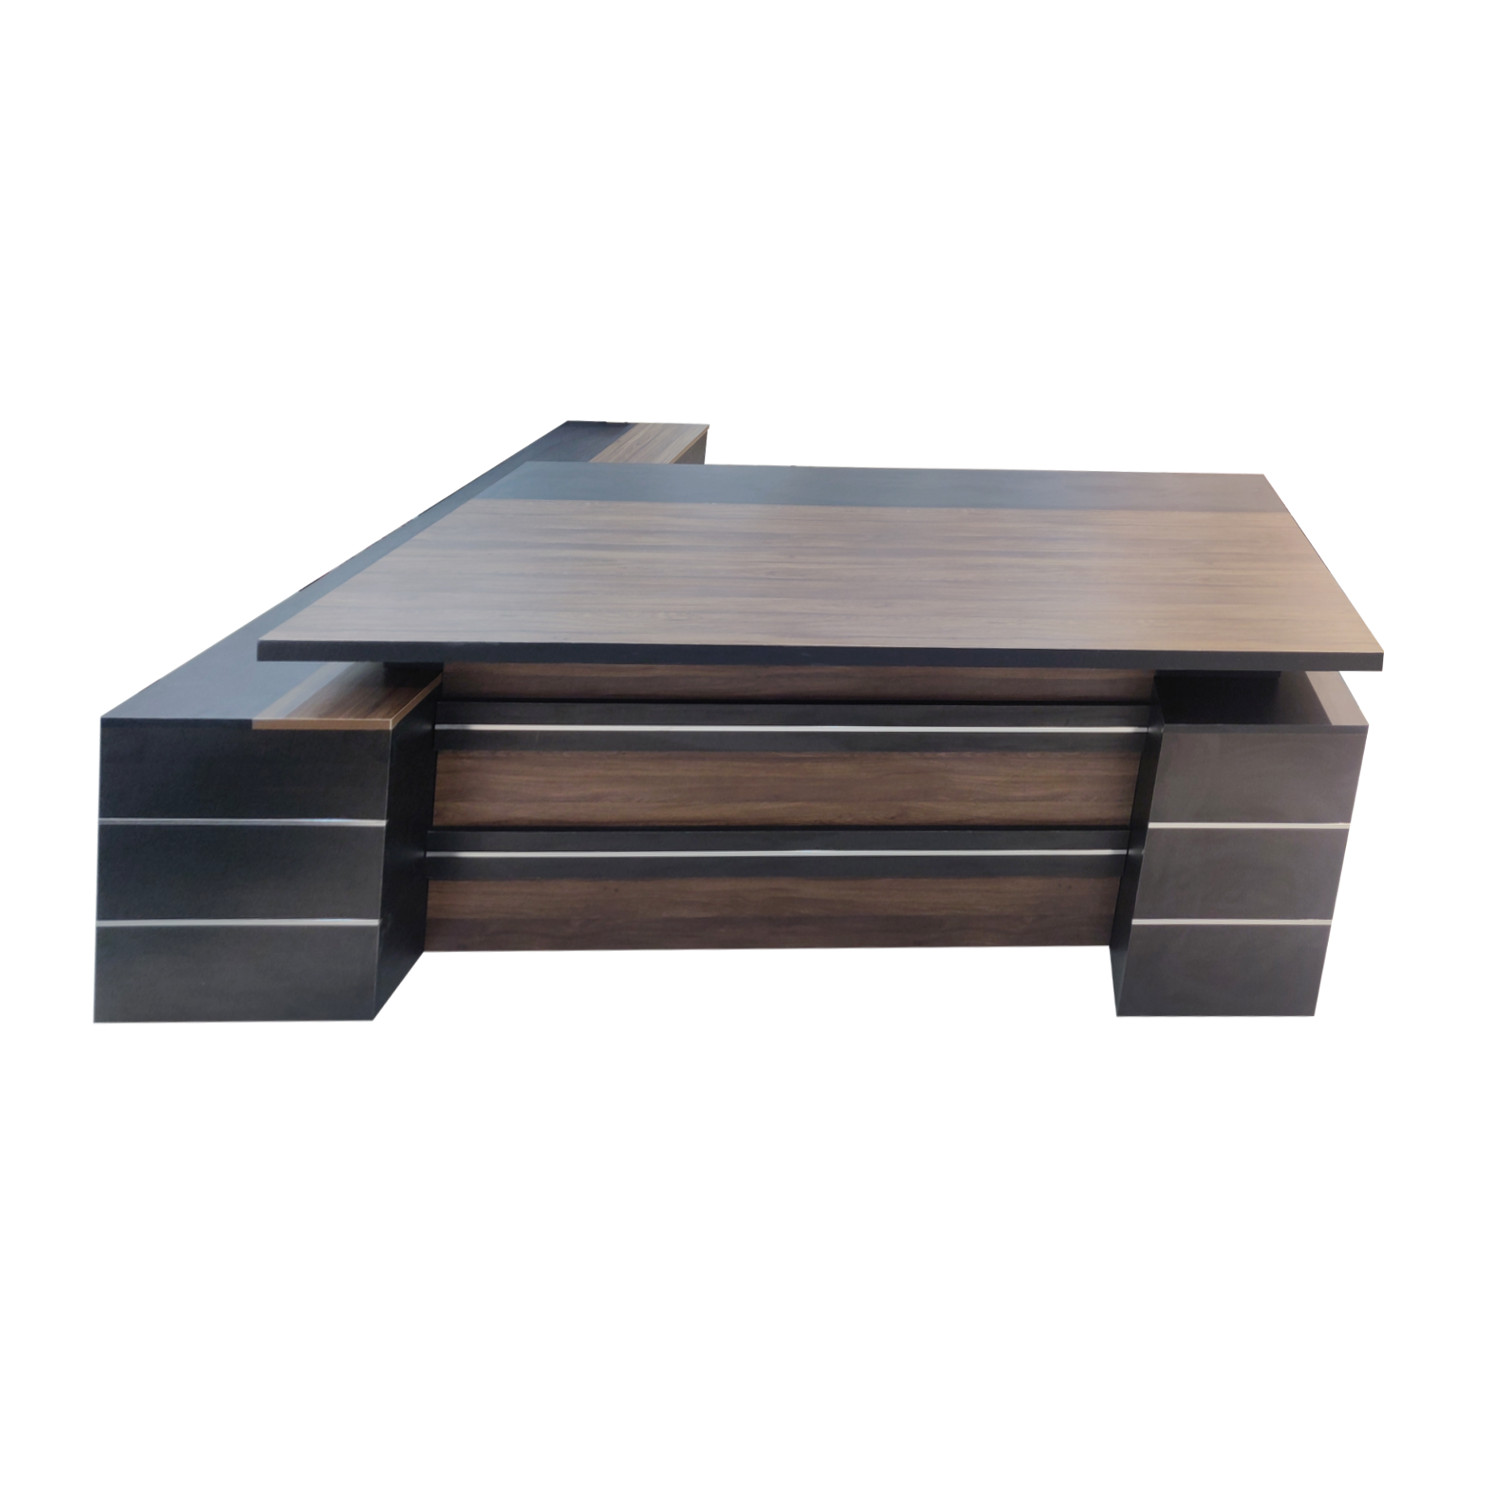 Amaltas Director Table for Office Use